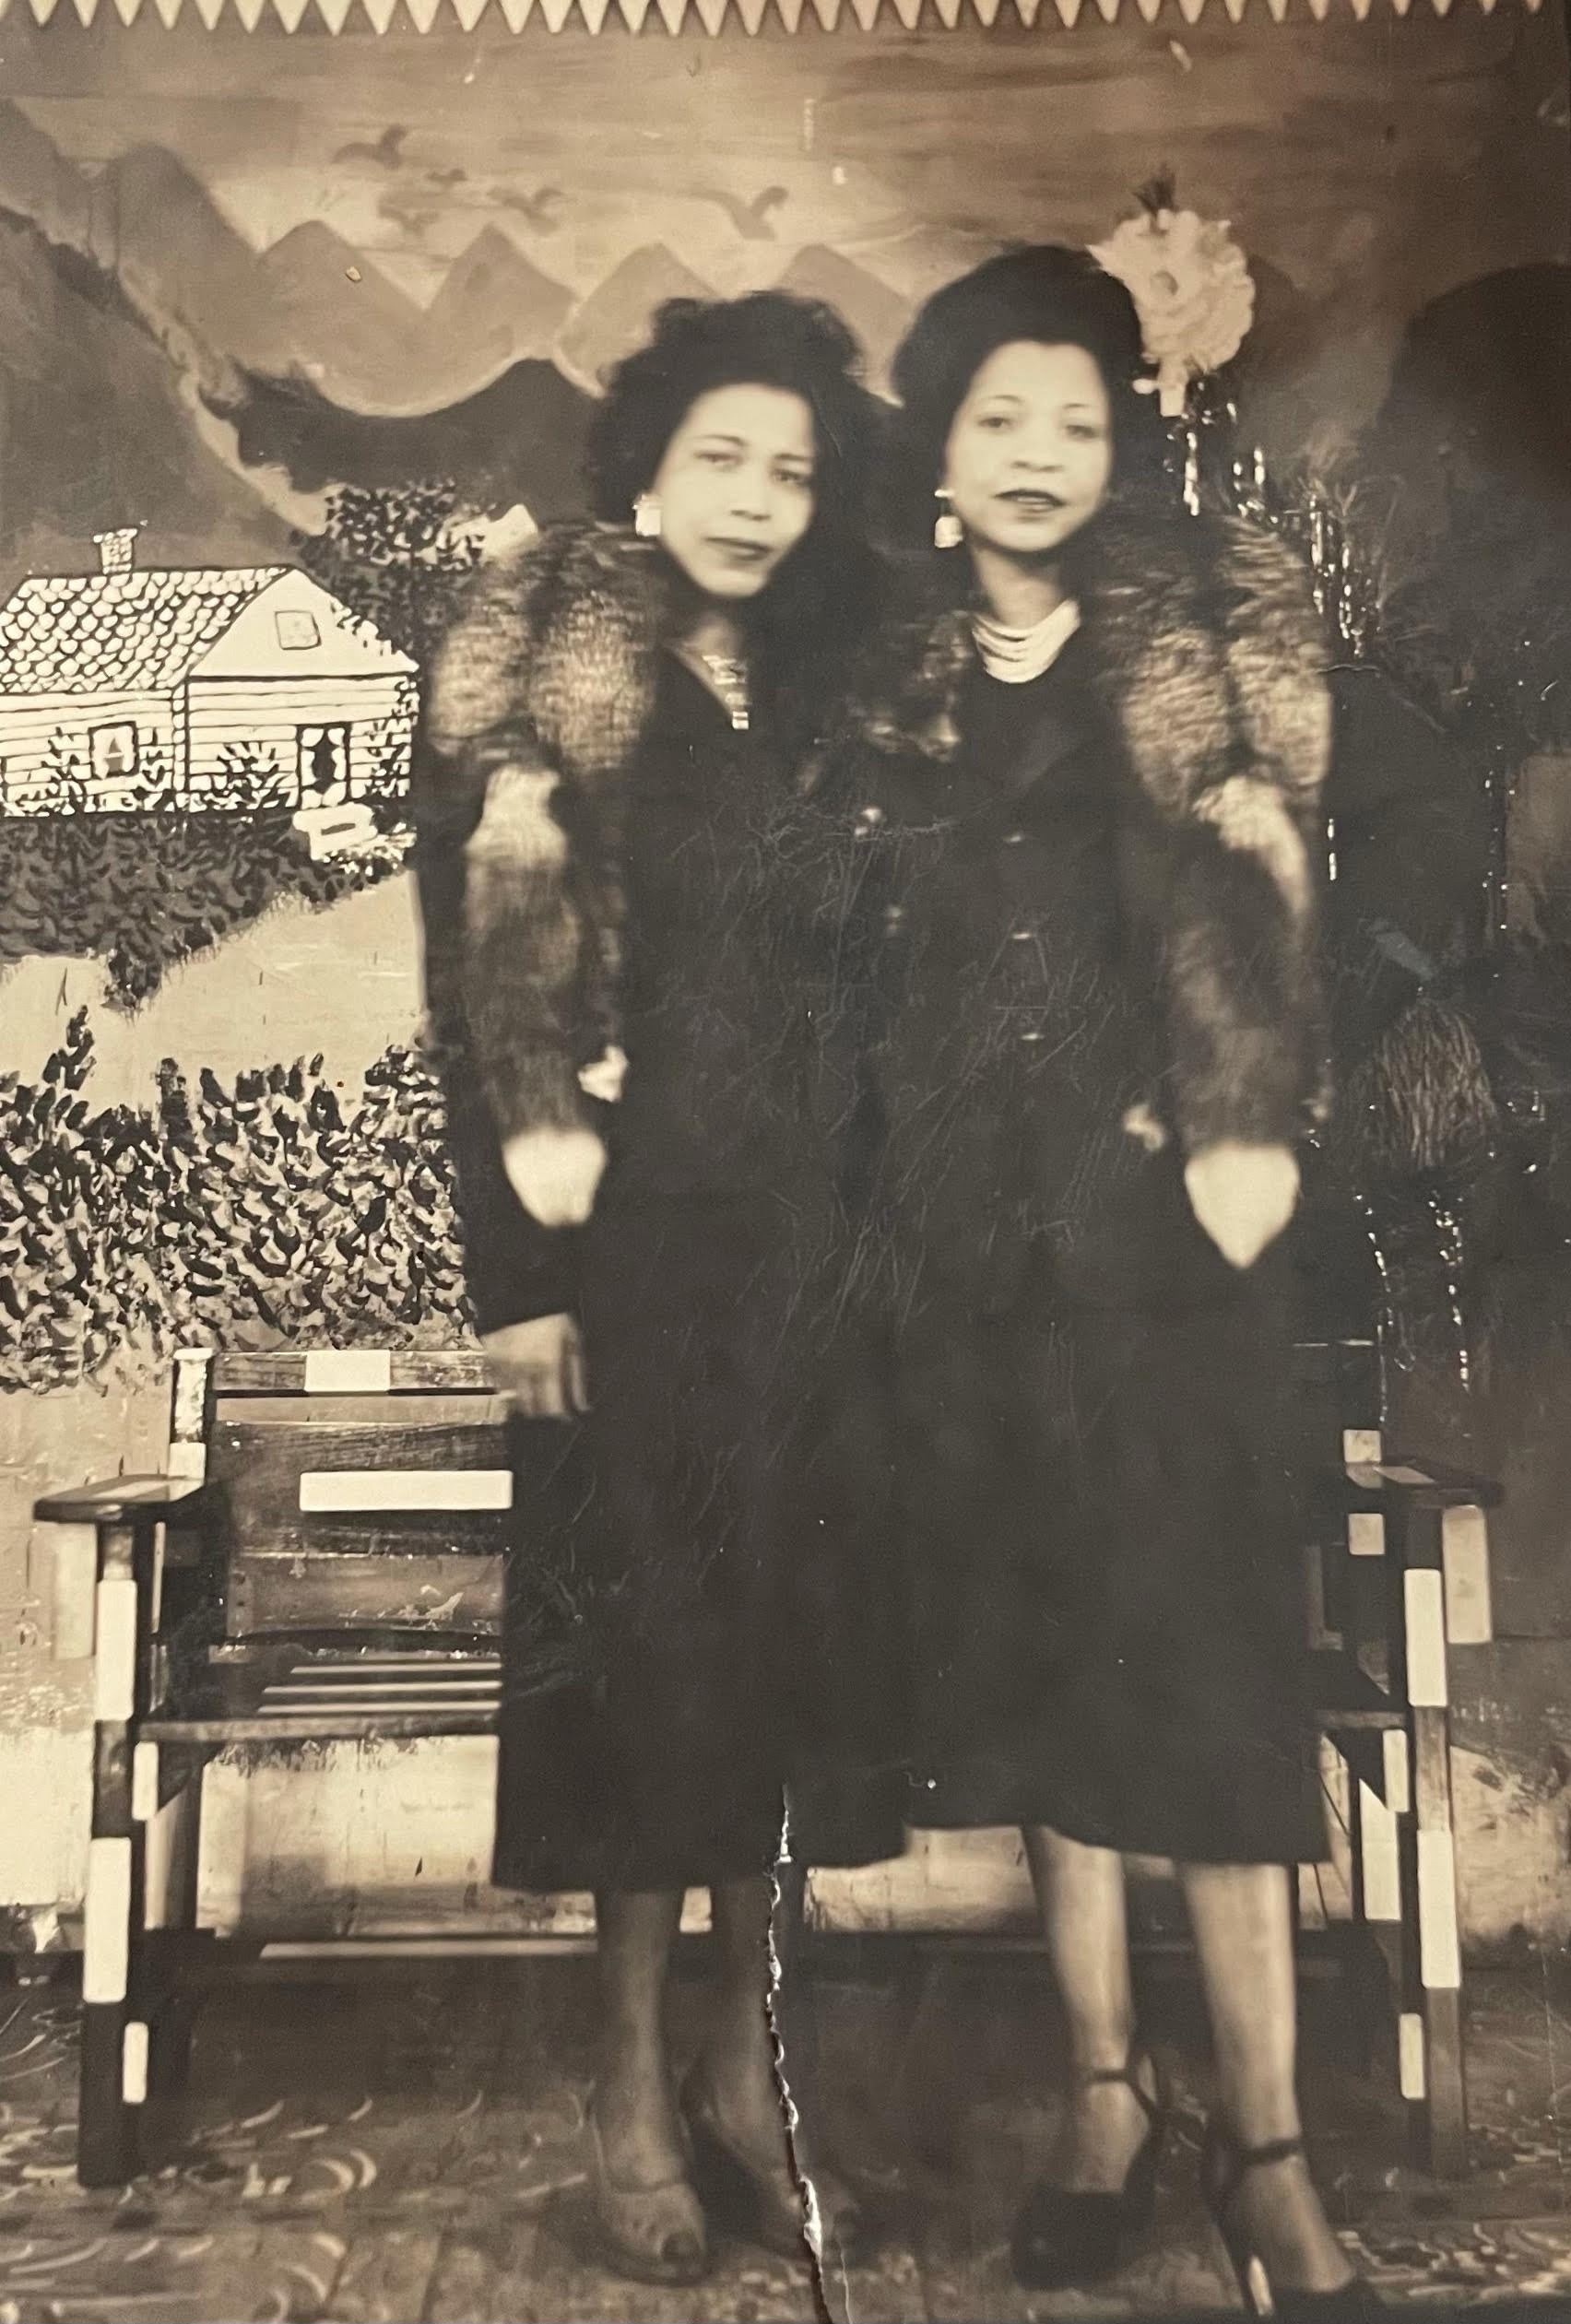 Two women dressed up in mink stoles and jewelry from the 1920s